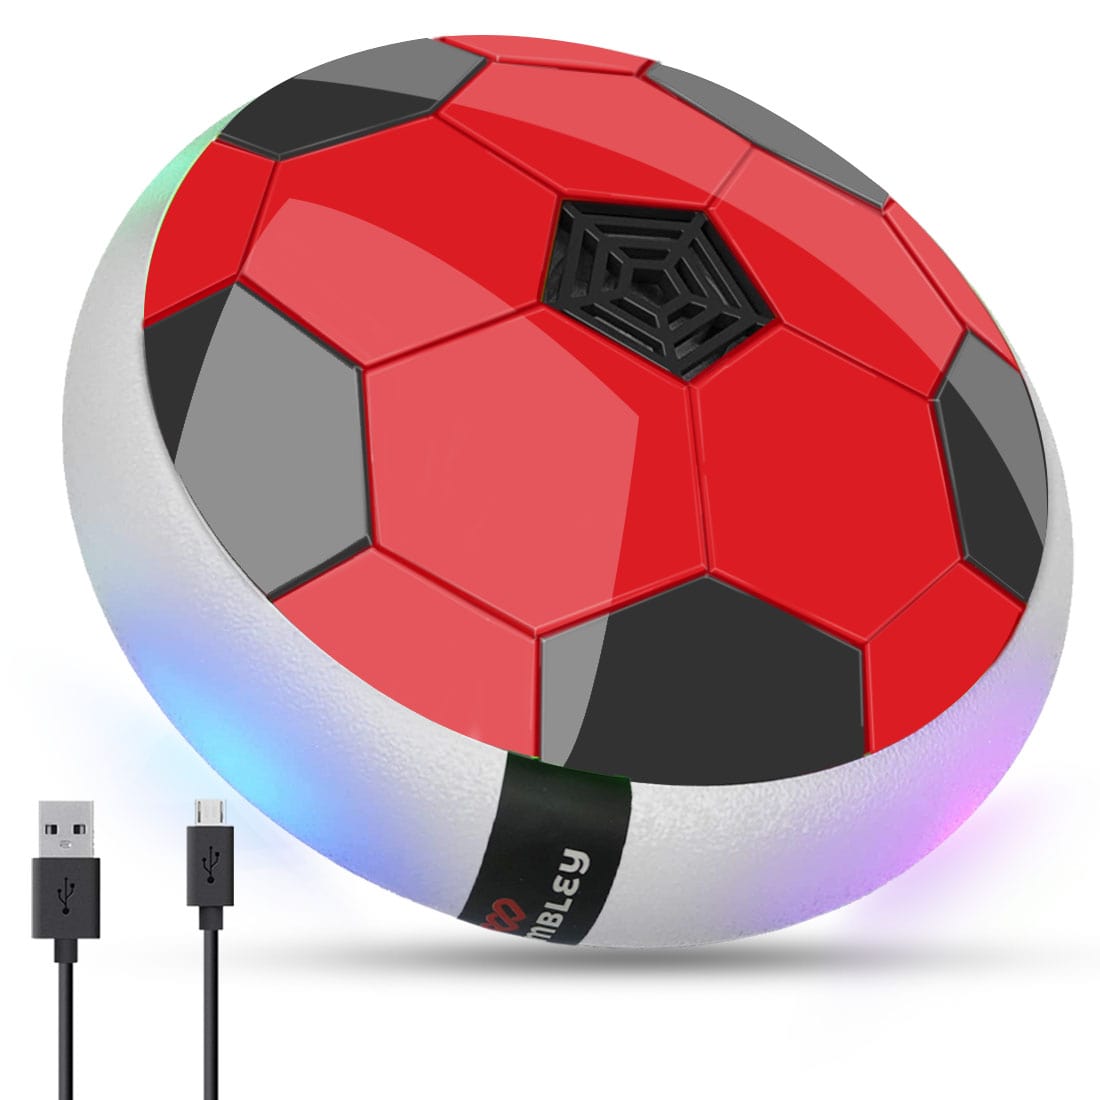 Mirana C-Type USB Rechargeable Battery Powered Hover Football Indoor  Floating Hoverball Soccer | Air Football Smart | Original Made in India Fun  Toy